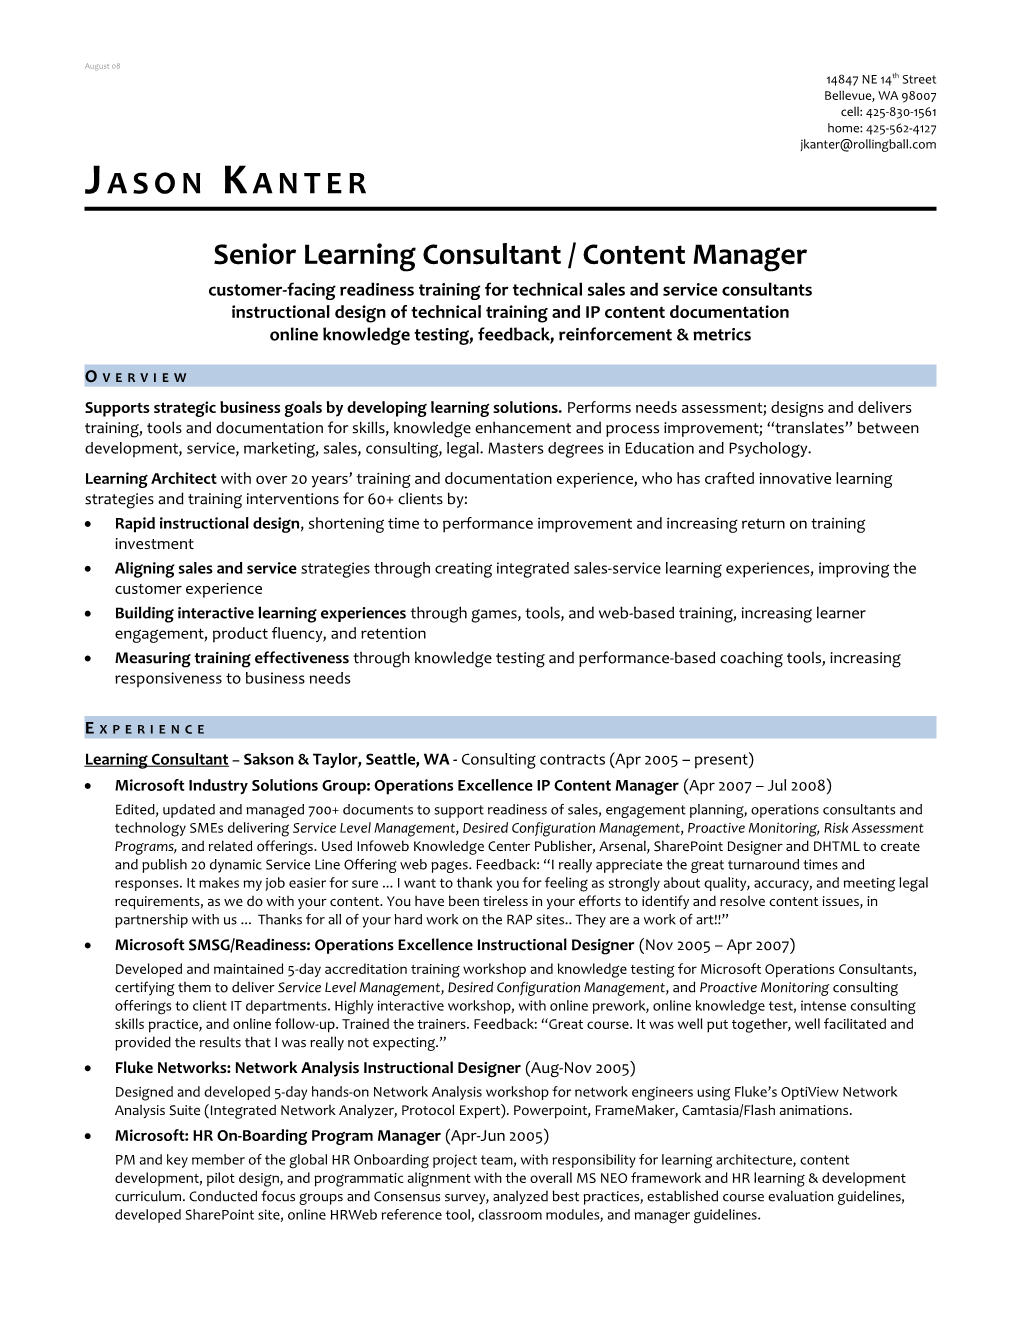 Senior Learning Consultant / Content Manager